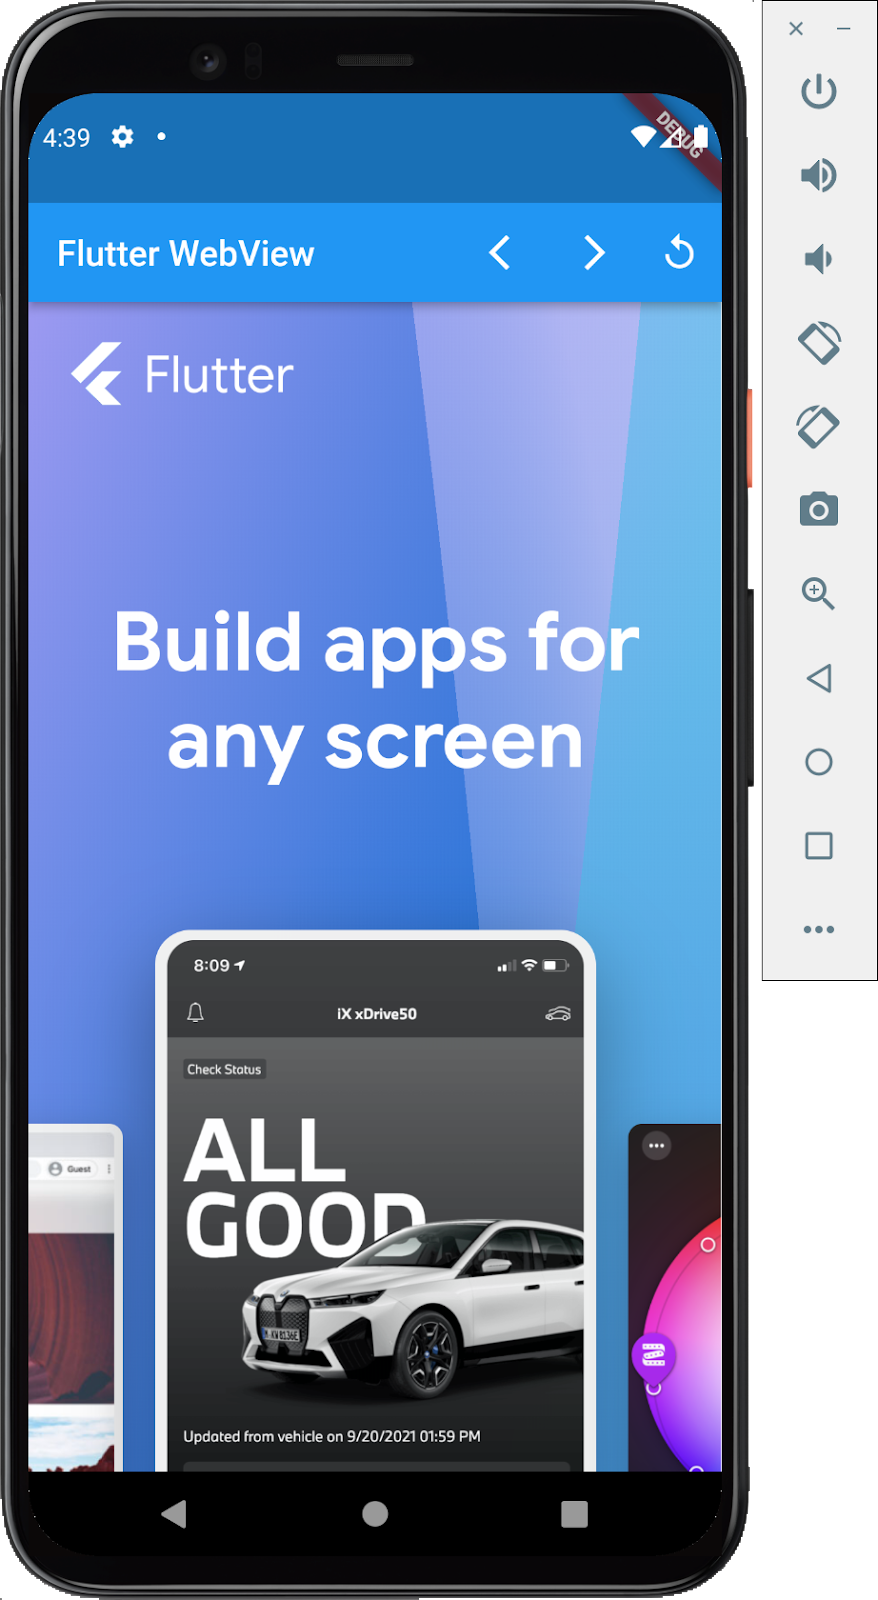 A screen shot of an Android emulator running a Flutter app with an embedded webview showing the Flutter.dev homepage with previous page, next page, and page reload controls